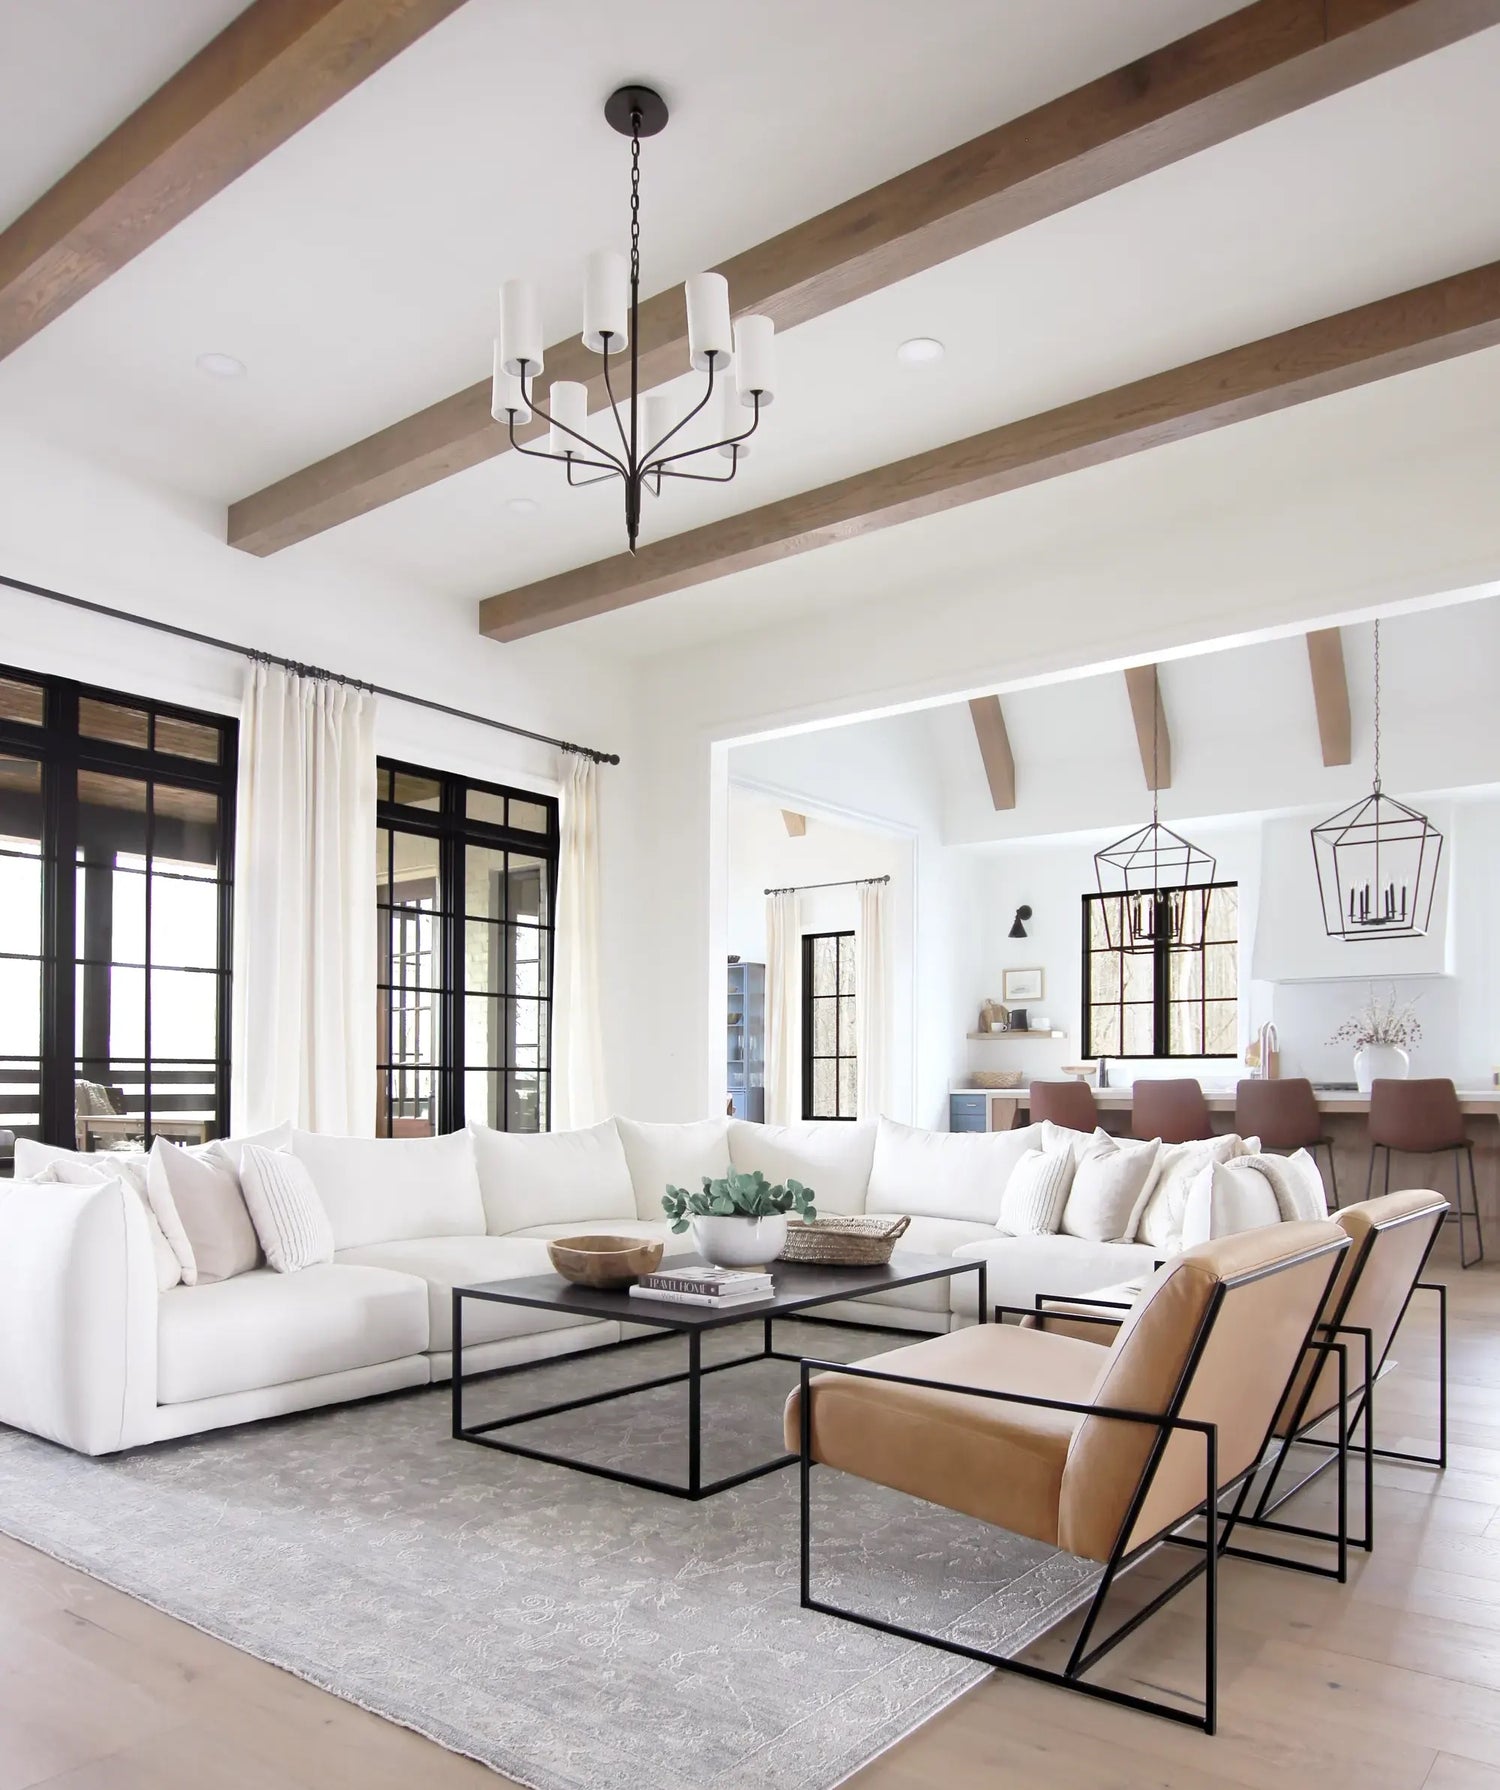 A modern, airy living room with white walls and wooden ceiling beams. It features a large white sectional sofa and two tan leather armchairs around a black metal coffee table. In the background, there's a dining area with a table and chairs beneath geometric light fixtures.